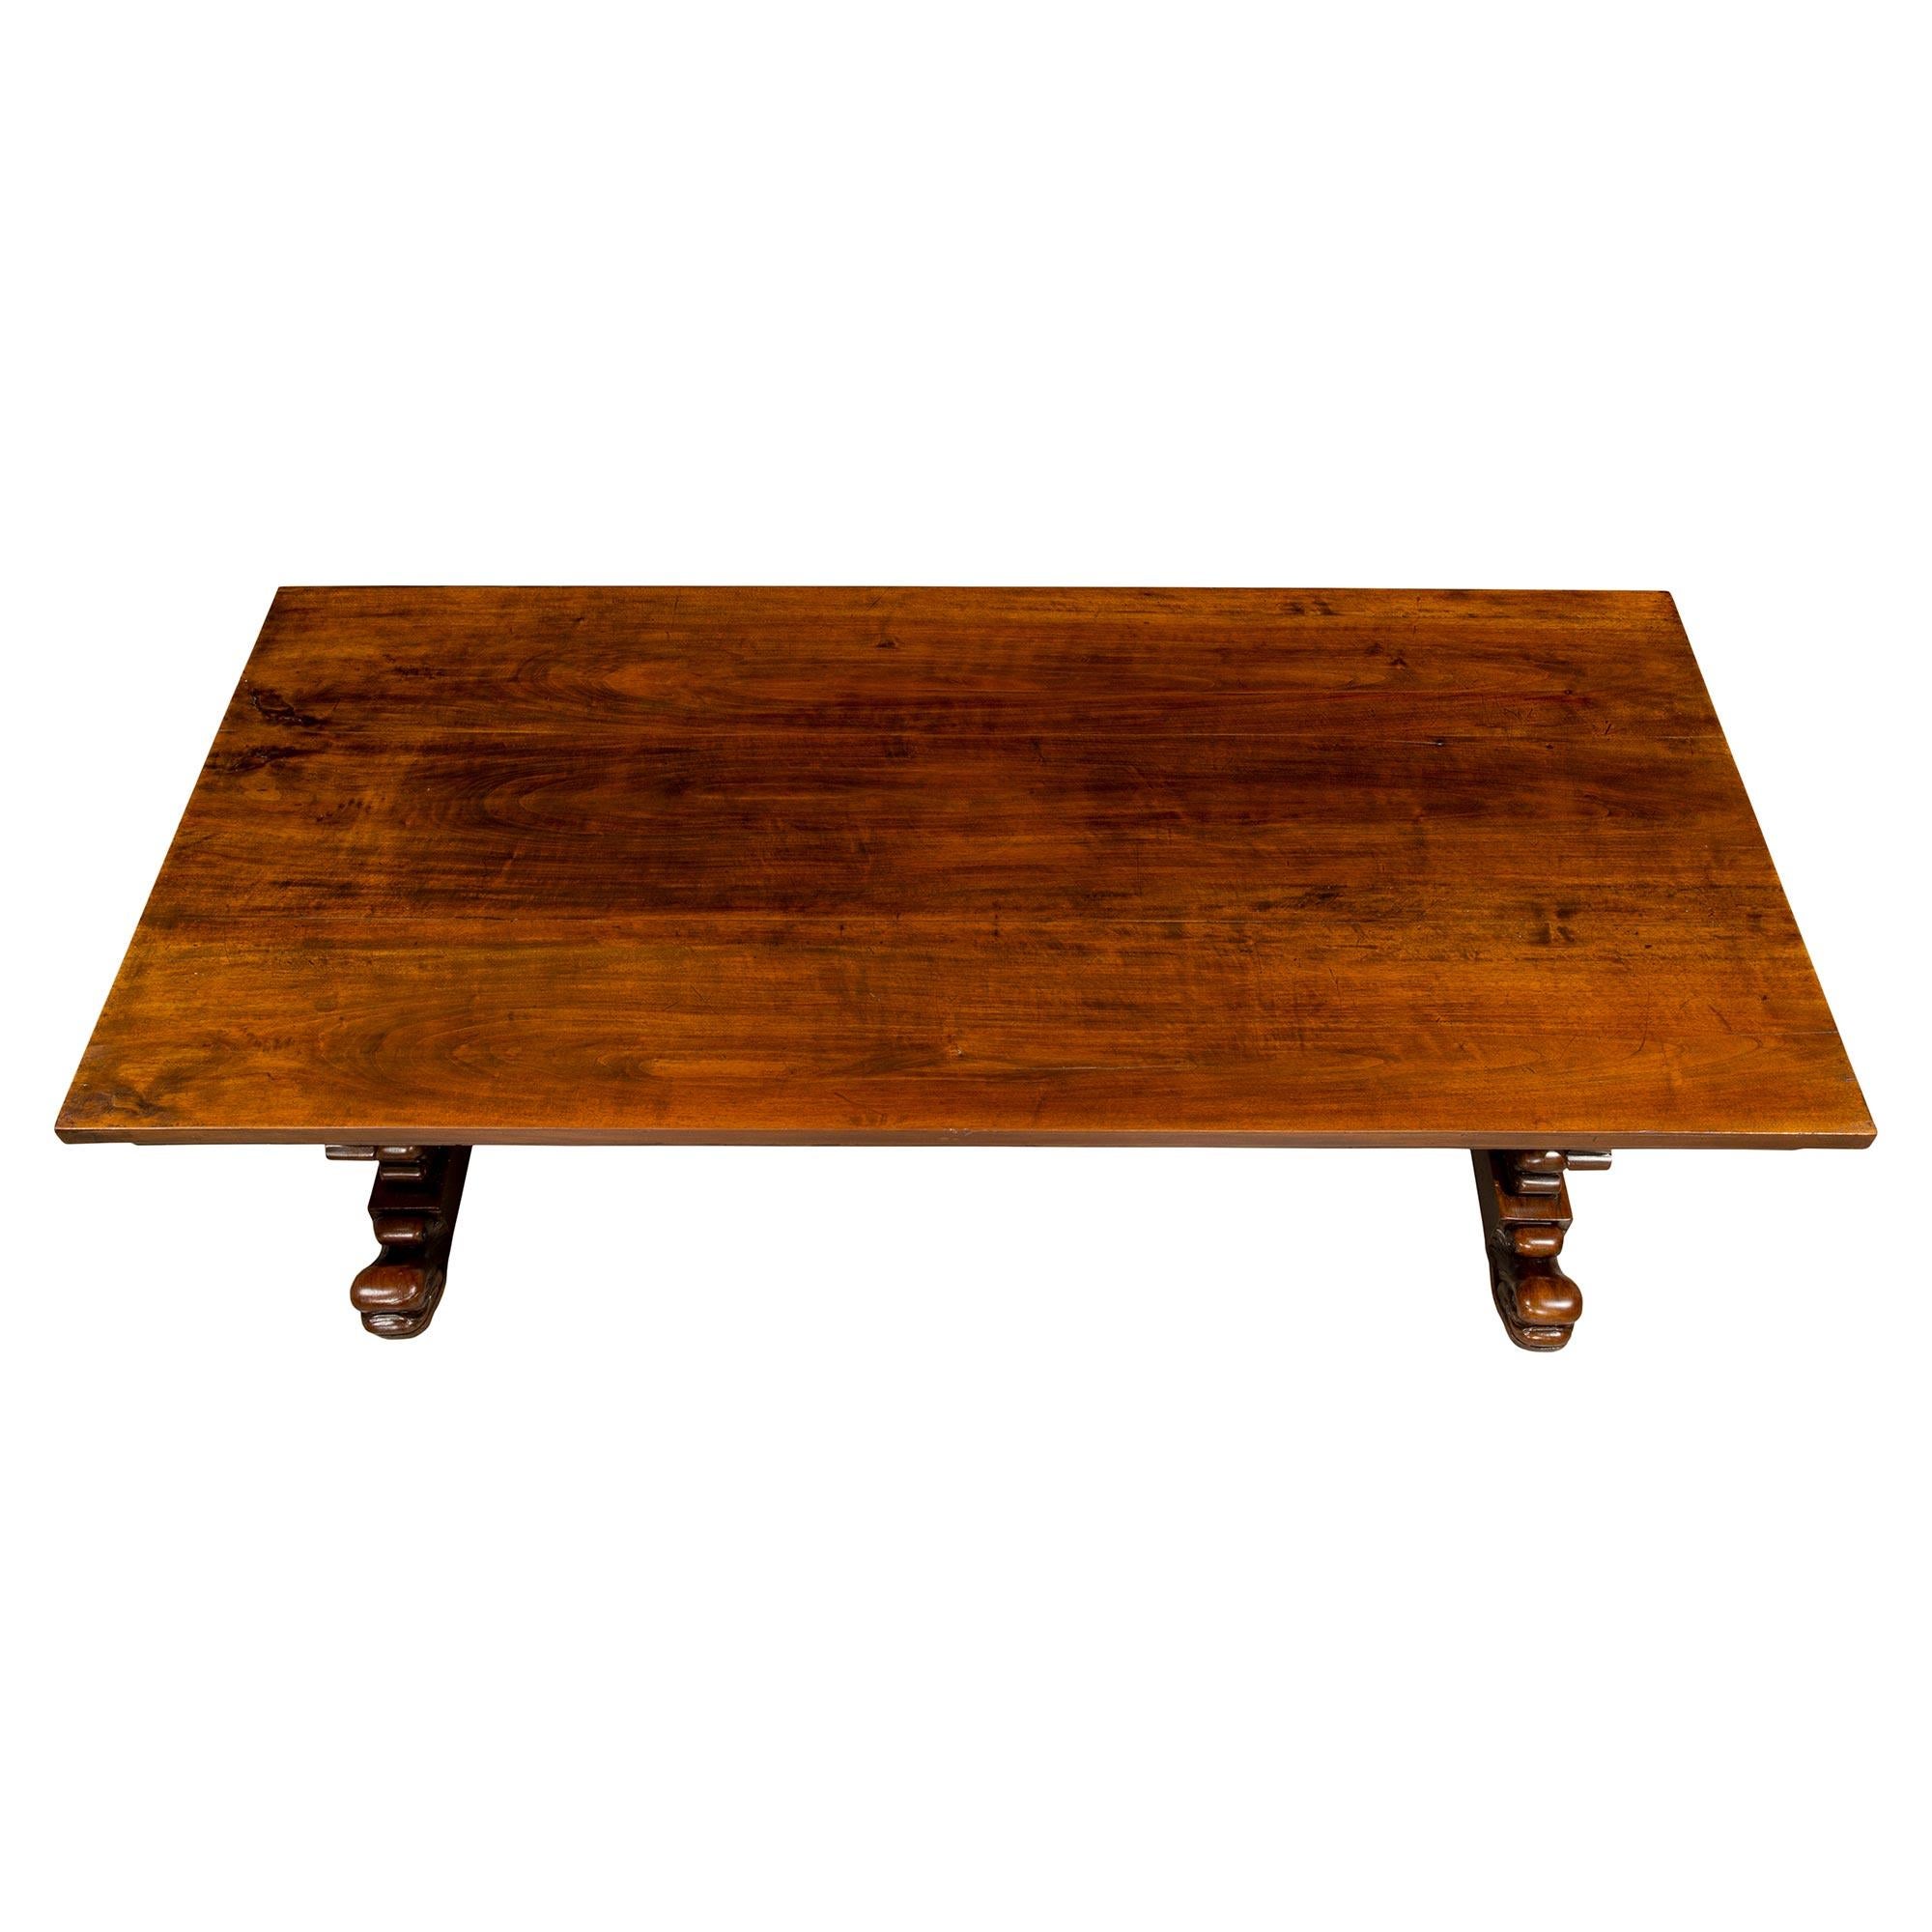 A very handsome Italian early 19th century solid walnut dining table. The table is raised on impressive supports with intricate carvings of large scrolls and acanthus leaves ending with carved dolphins at the base and also at the feet. The supports